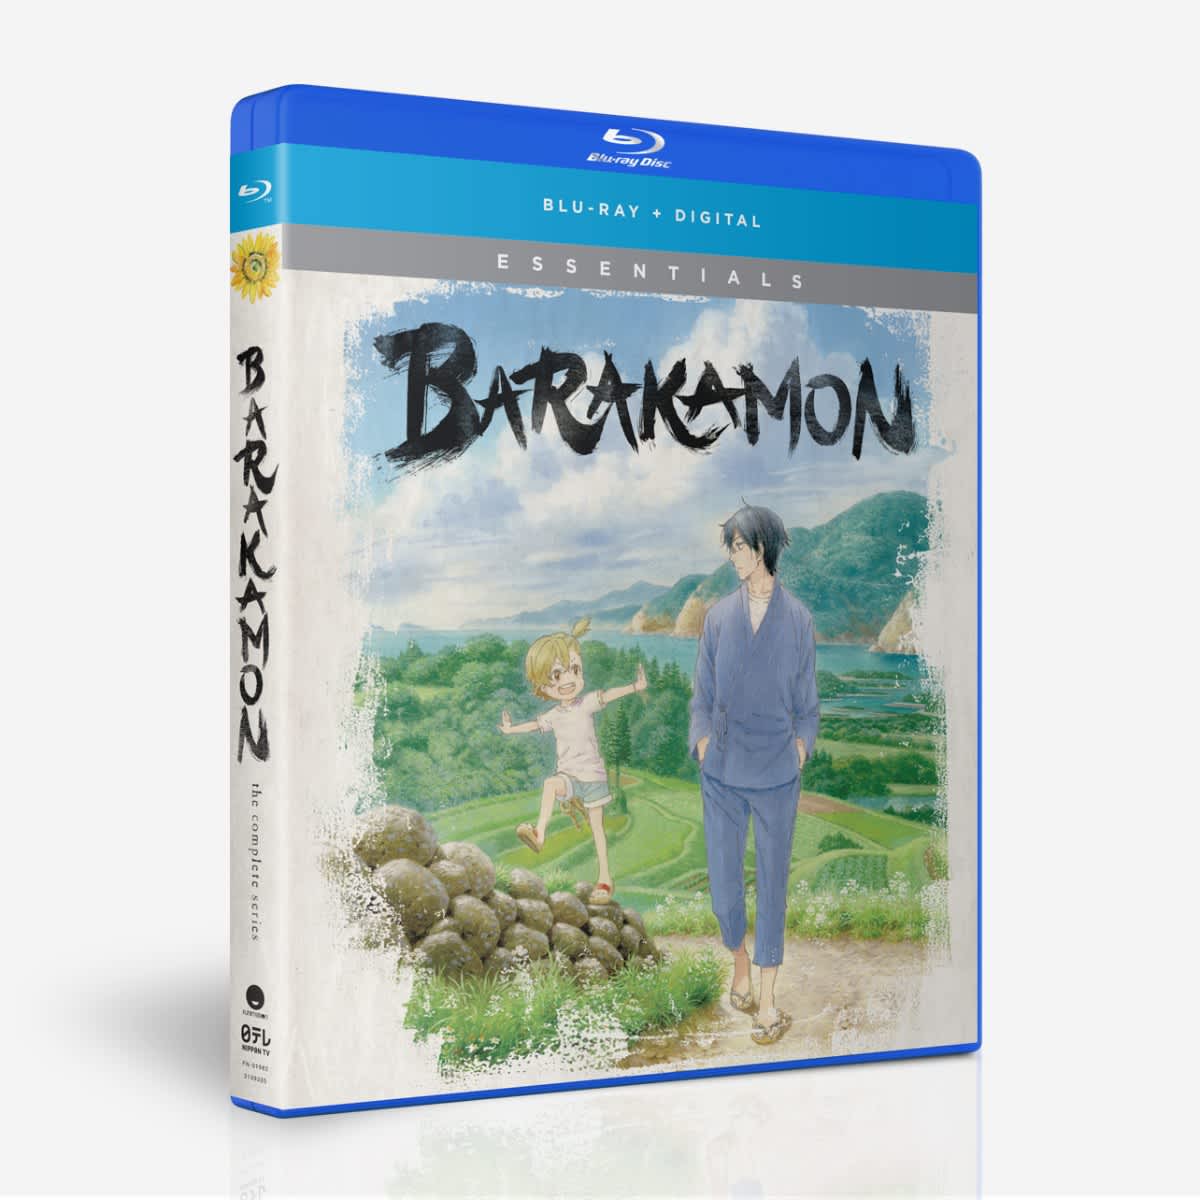 Barakamon Collected Commentary Notebook (Episodes 1 – 12) – Vintagecoats